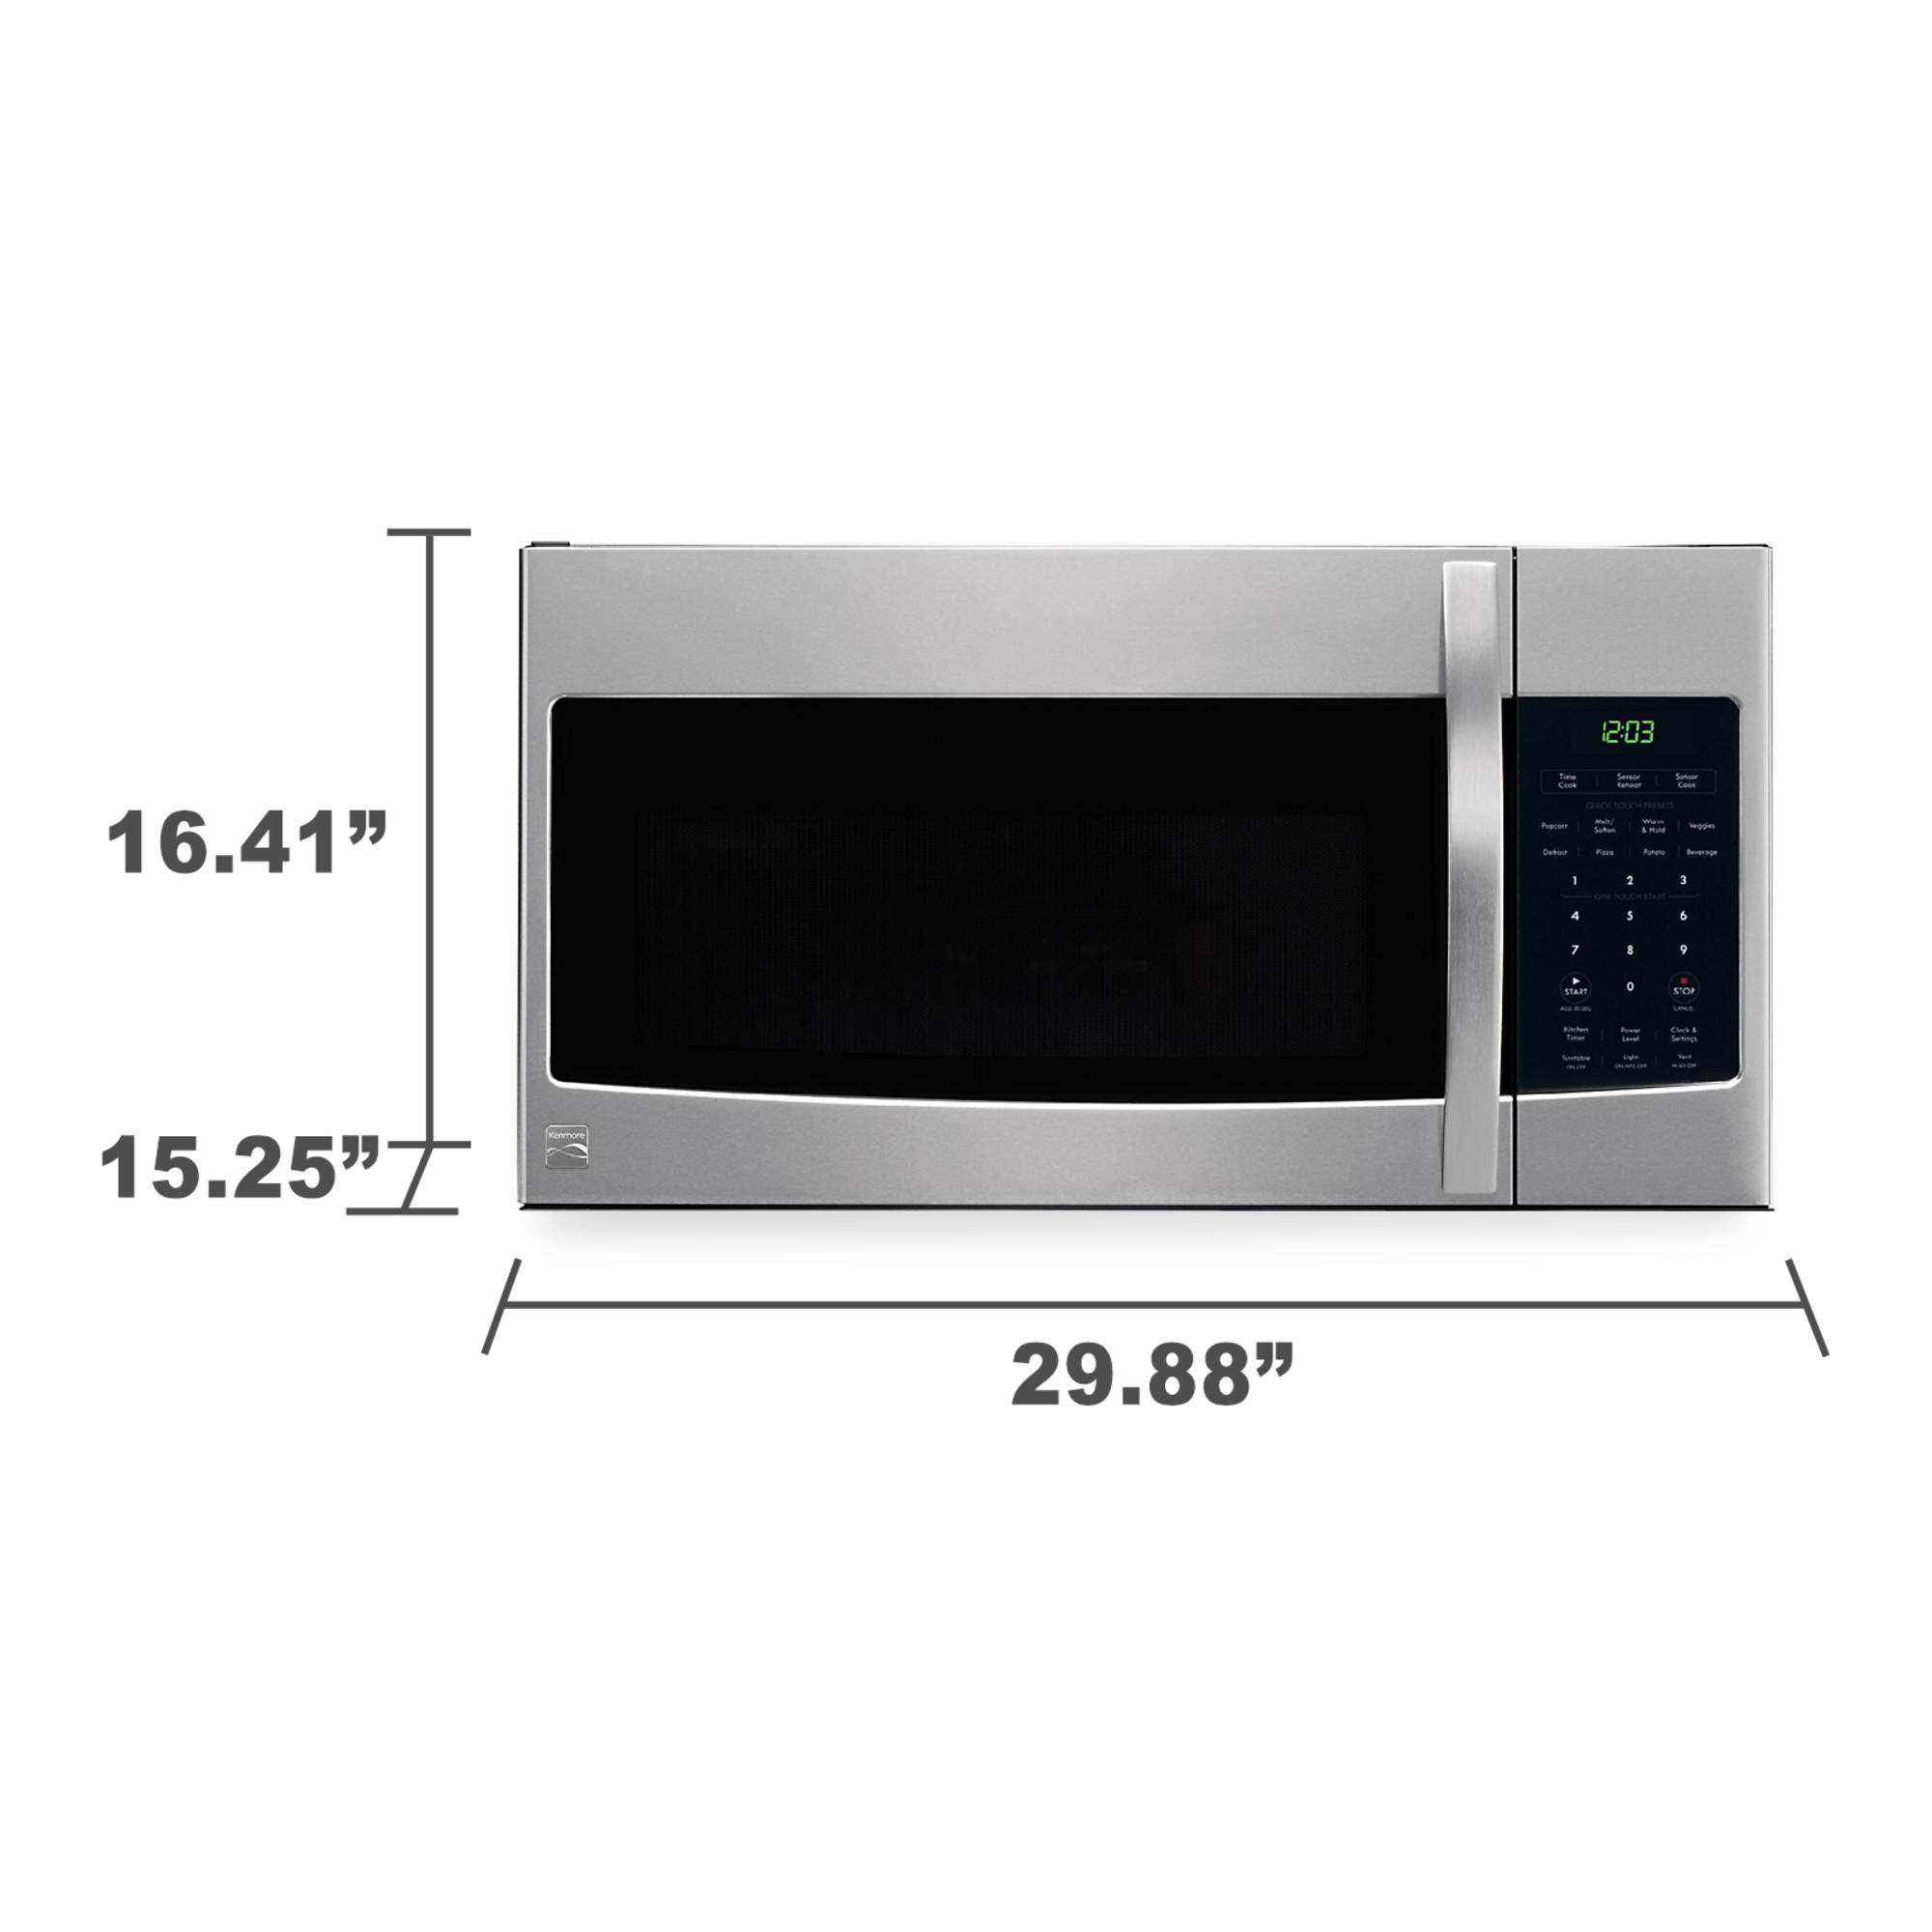 1.6 cu ft Over-the-Range Microwave